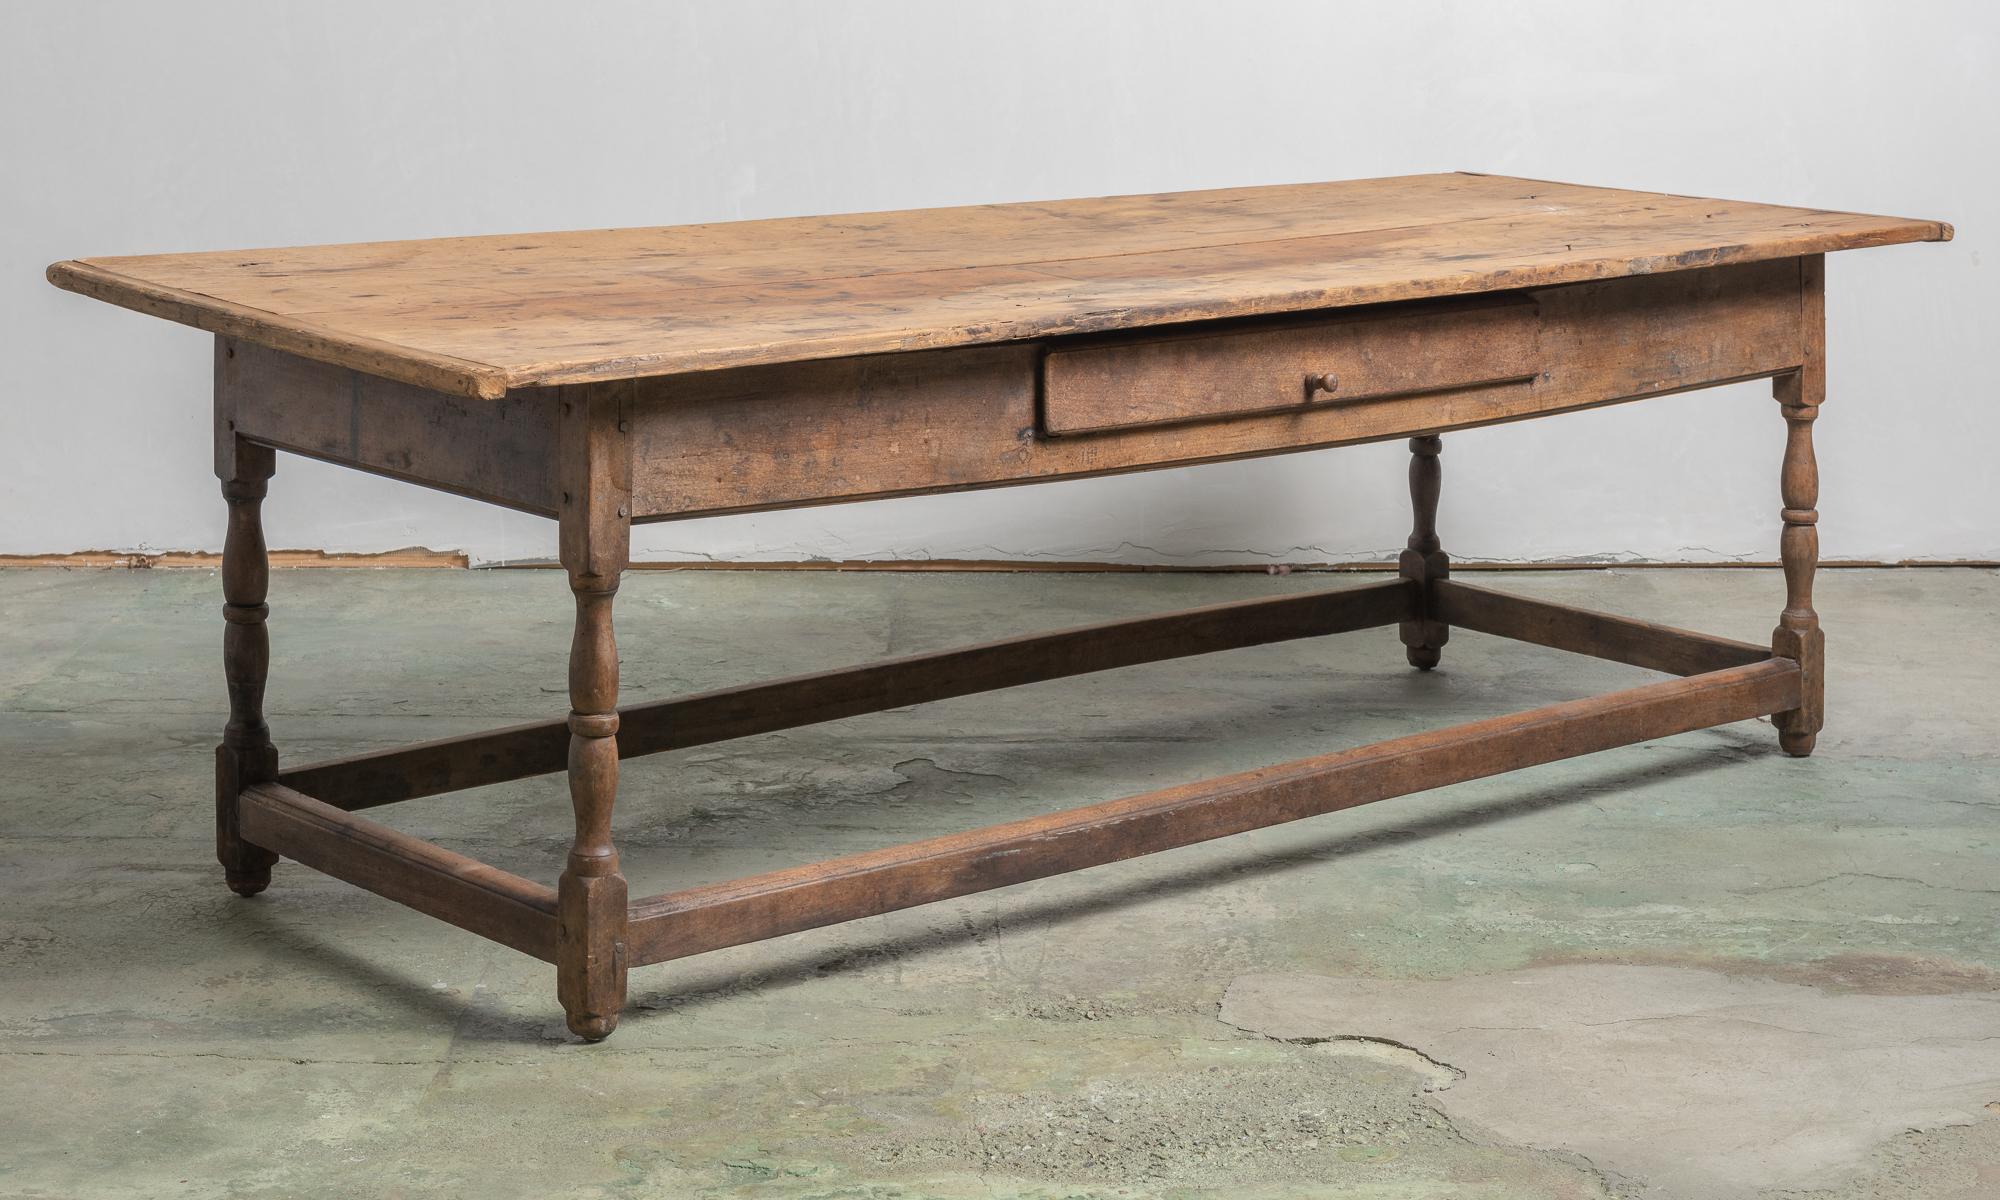 New England Tavern Table, America, circa 1790.

Sturdy oak construction includes a three-plank pine top, hand-turned legs, stretcher supports, and a single pull drawer.

86.25